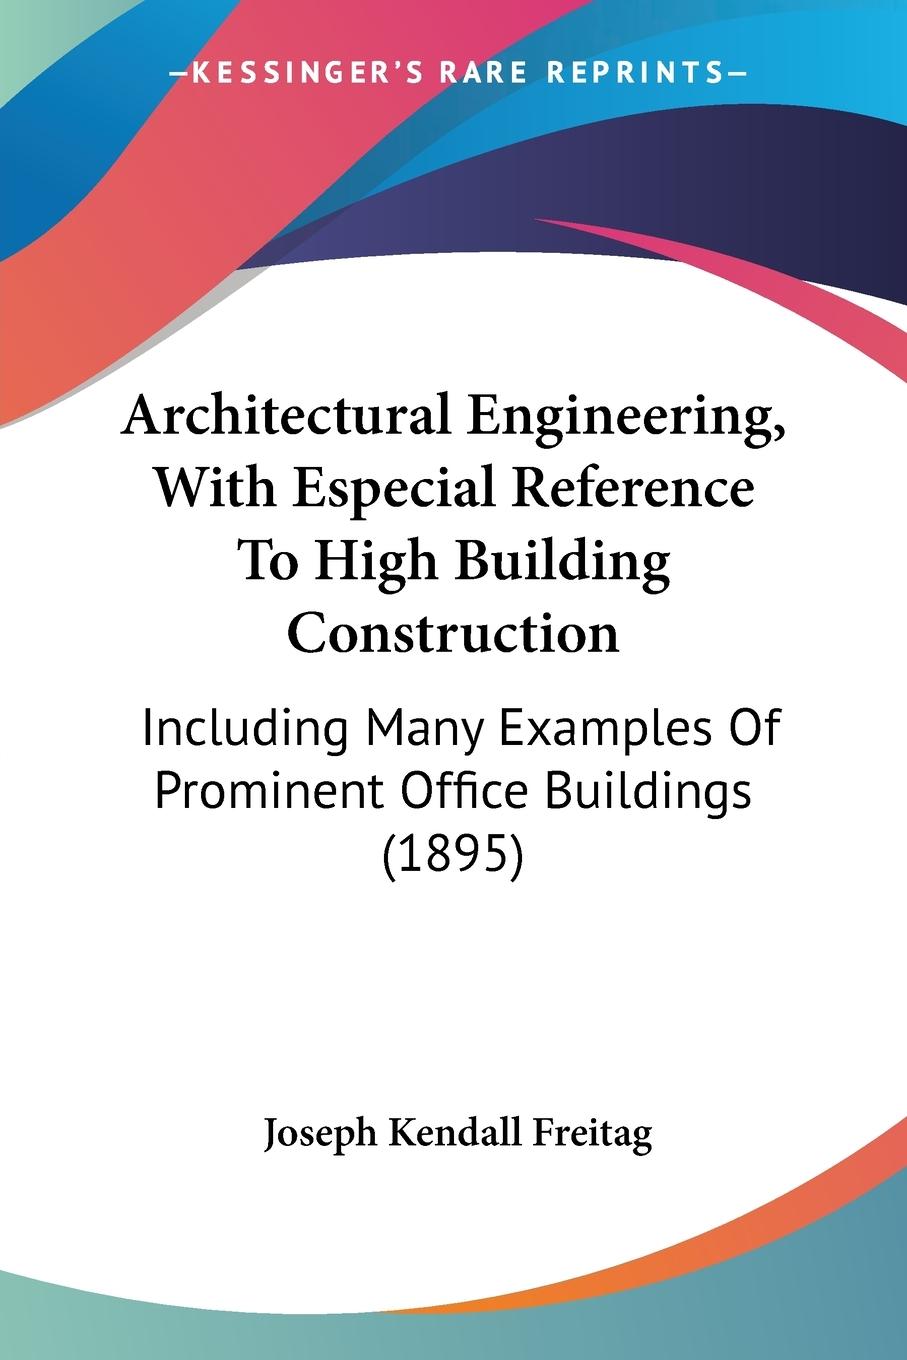 Architectural Engineering, With Especial Reference To High Building Construction - Freitag, Joseph Kendall